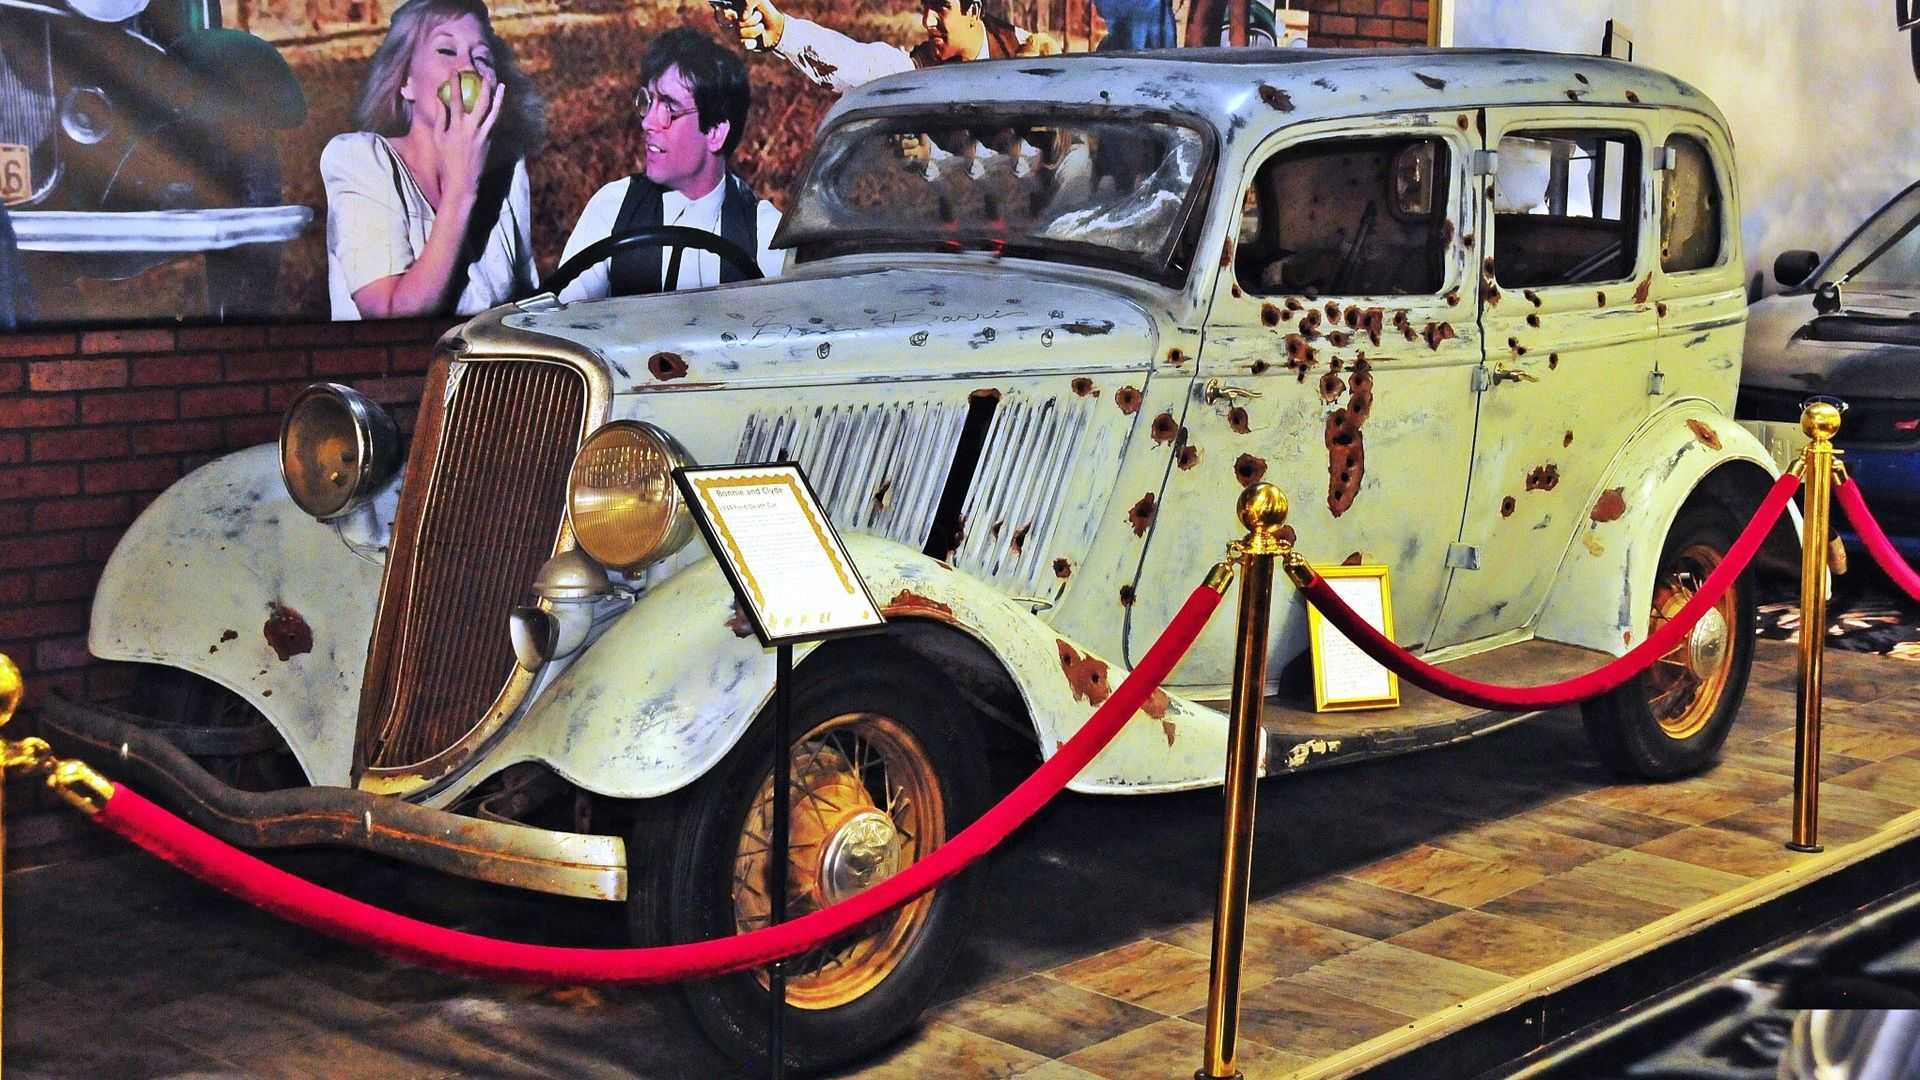 Look In Horror At The Bonnie And Clyde Death Car | Motorious